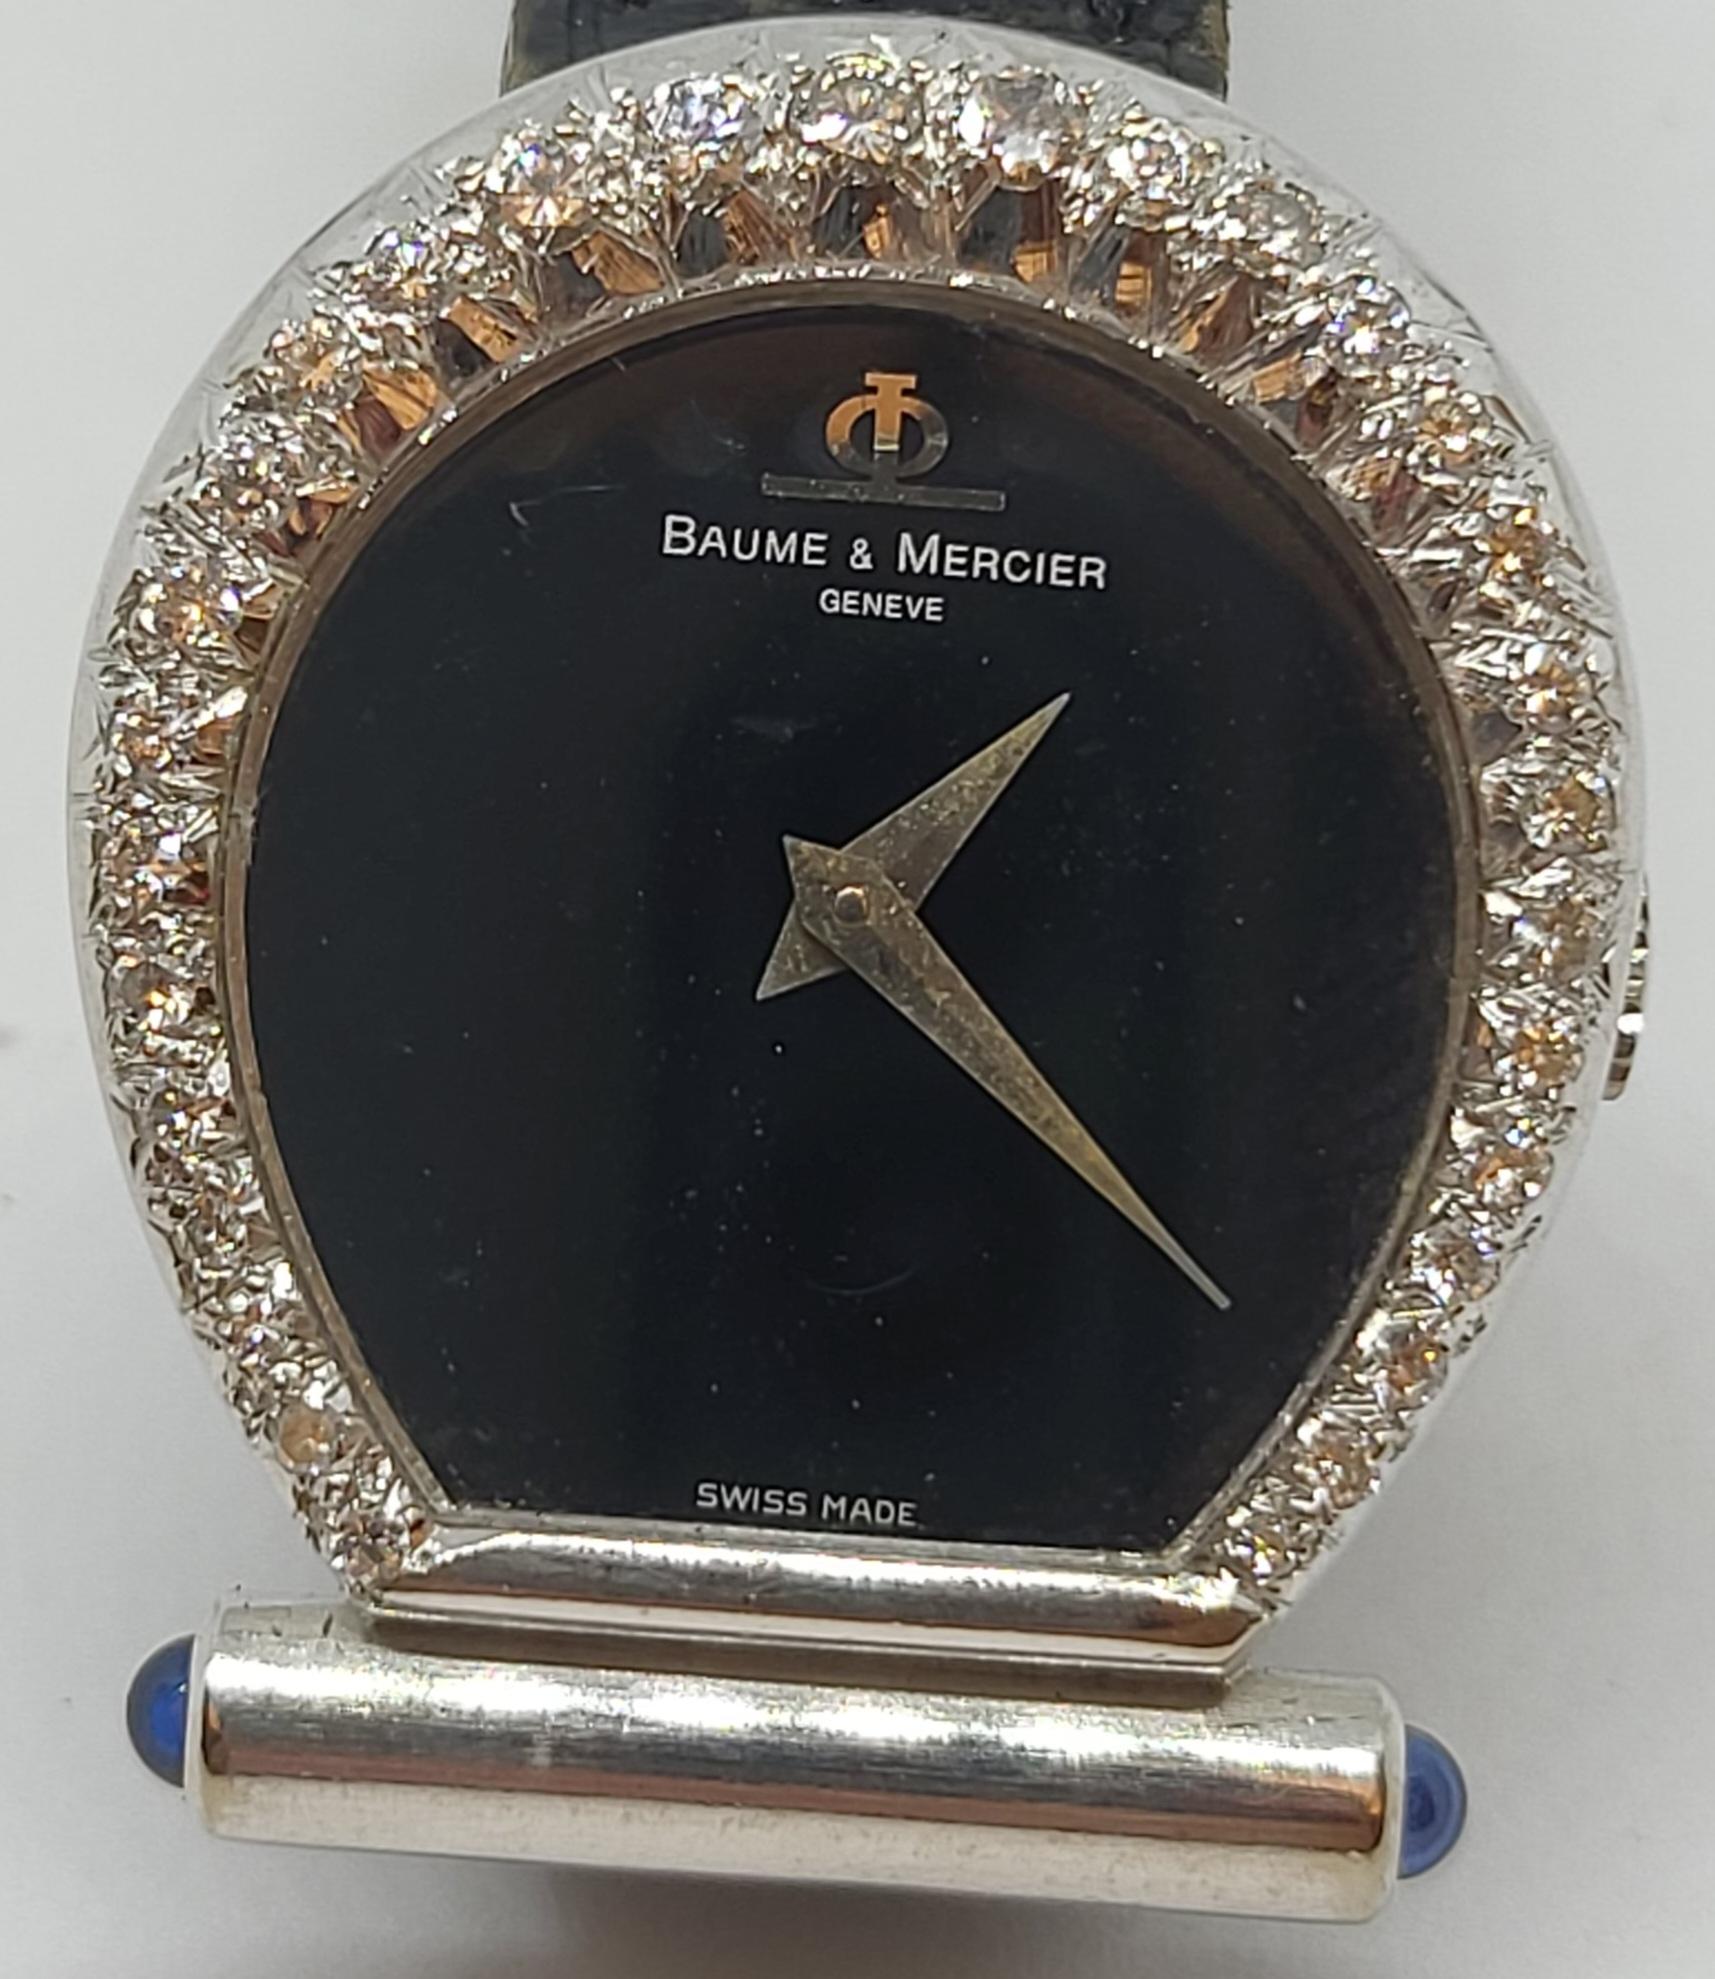 Baume & Mercier Horsebit 18 k White Gold Watch & Diamonds

Extremely Rare & Collectors Watch.

Movement : Mechanical with Manual winding & 17 Jewels
Strap: Baume & Mercier Black Leather
Case : 18 kt Solid white gold Diamond Set , 6.3mm Thick
Dial :